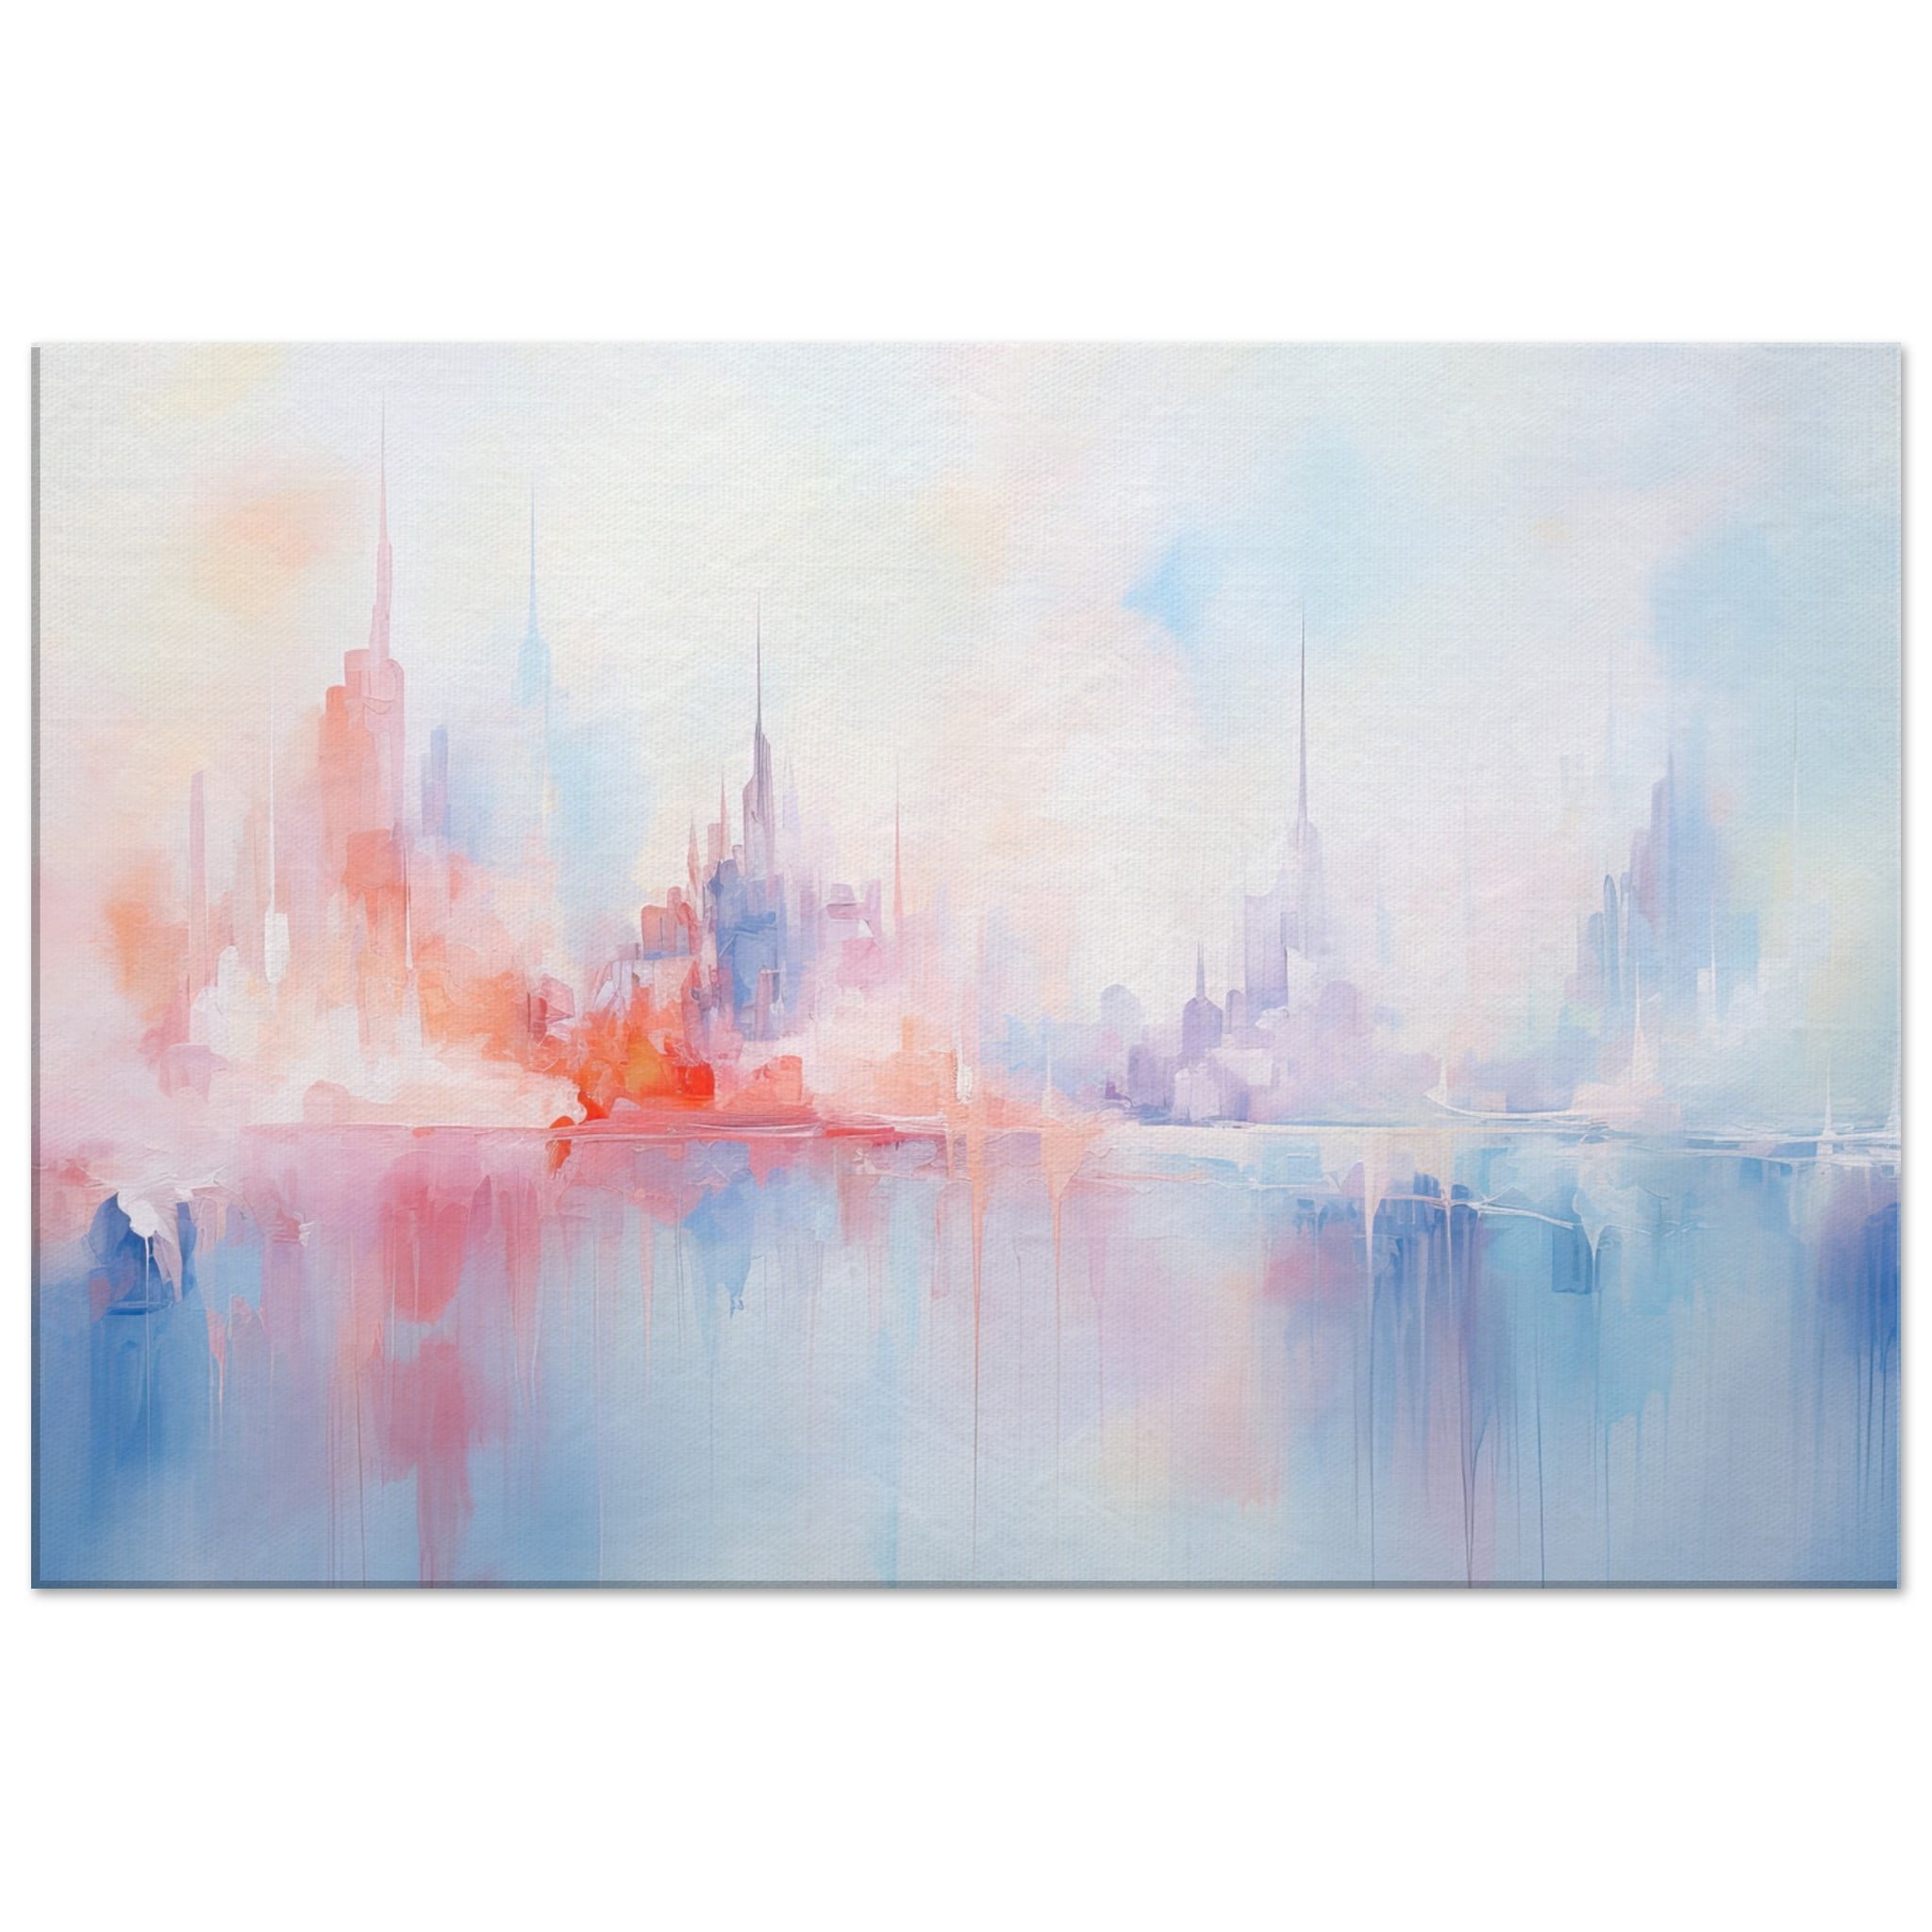 Pastel Abstract City Skyline Canvas Print – 60×90 cm / 24×36″, Thick